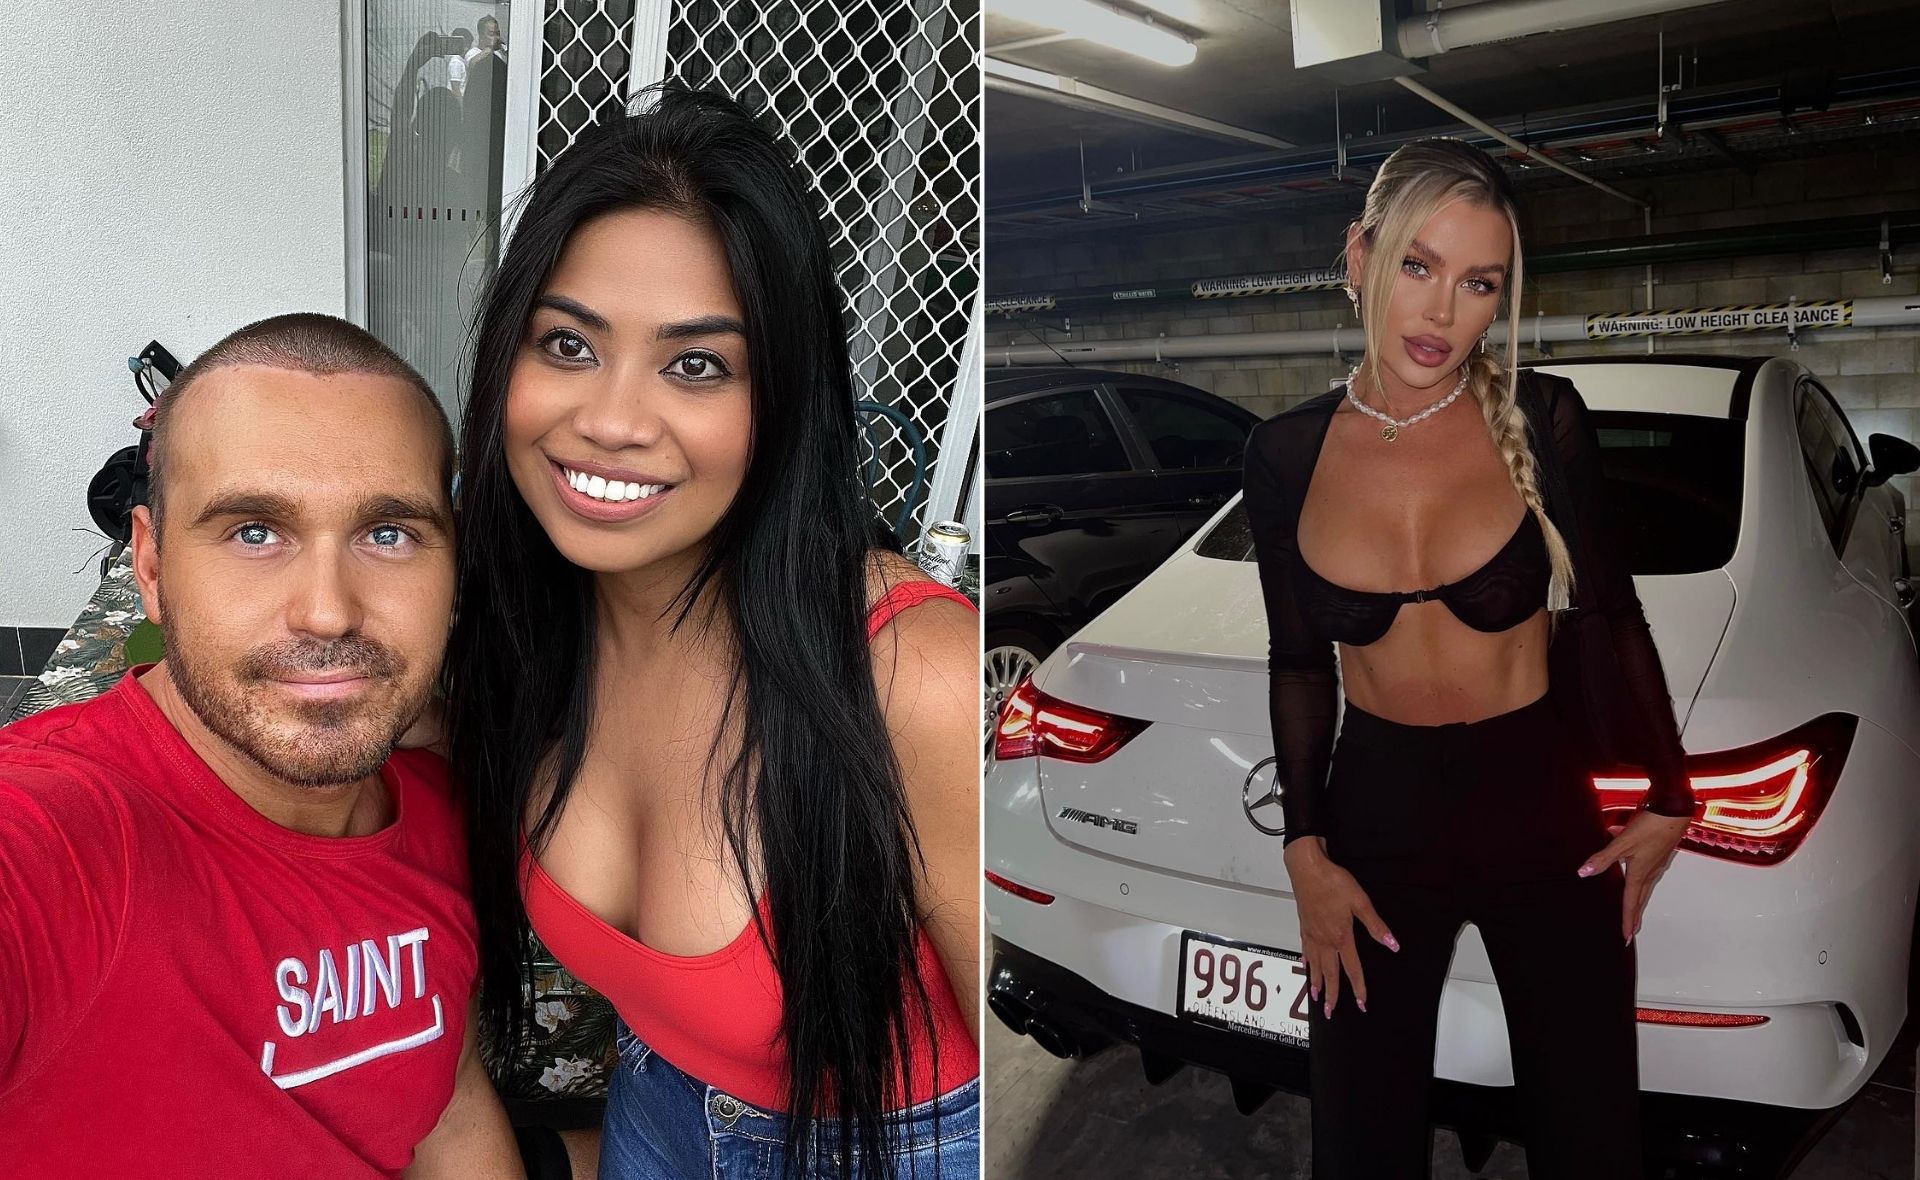 The simple question that caused MAFS star Cyrell Paule to lash out at Big Brother’s Skye Wheatley at a celebrity event